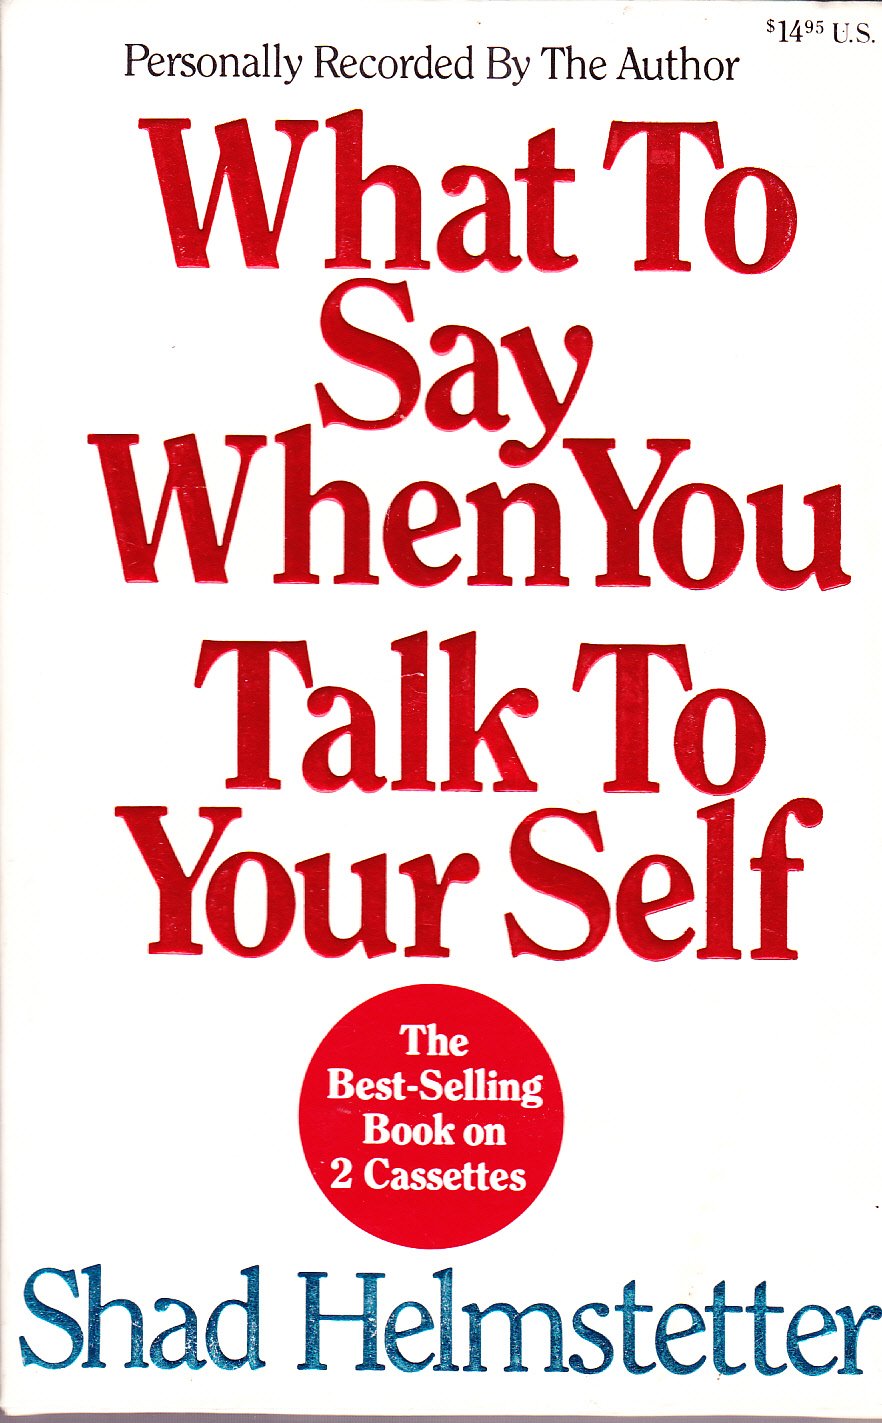 ‘What To Say When You Talk To Yourself?’ - A Summary